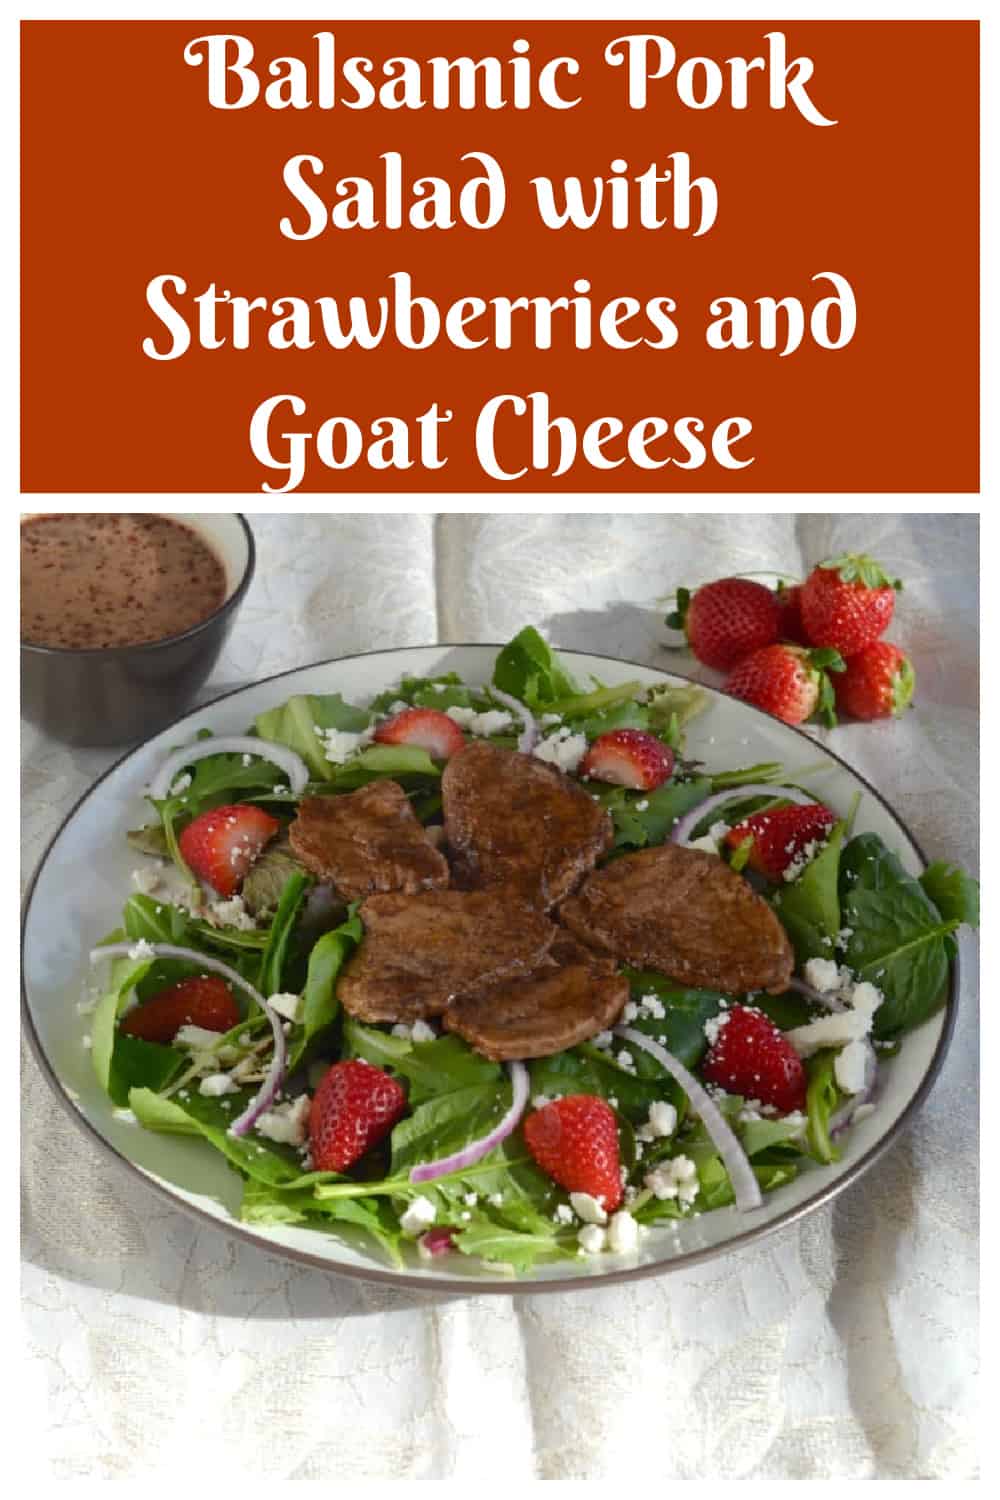 Pin Image:  Text title, a plate of salad with pork and strawberries on top. 